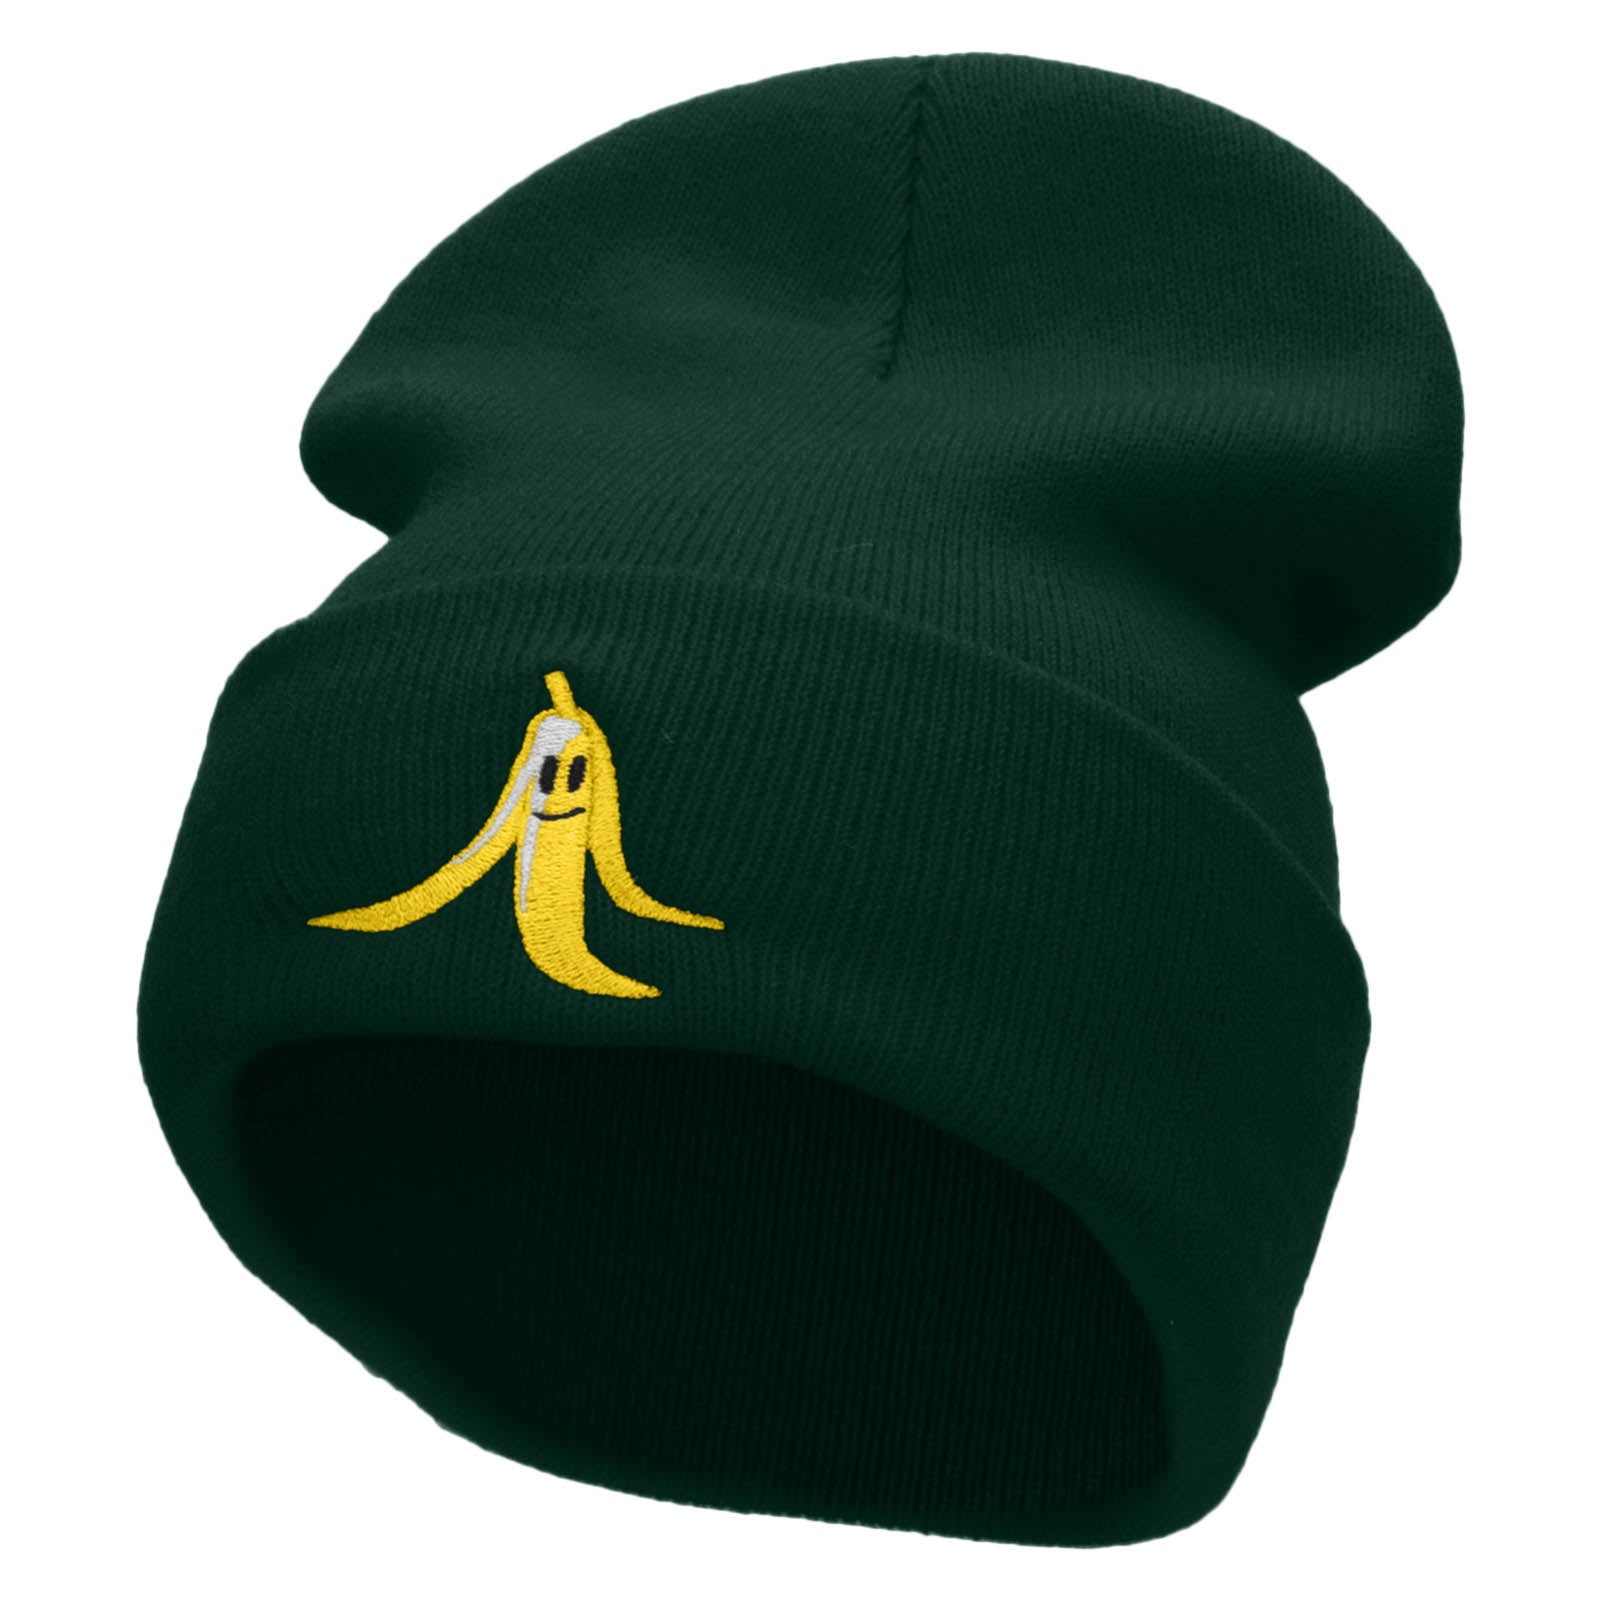 Banana Smile Embroidered 12 Inch Long Knitted Beanie - Dk Green OSFM